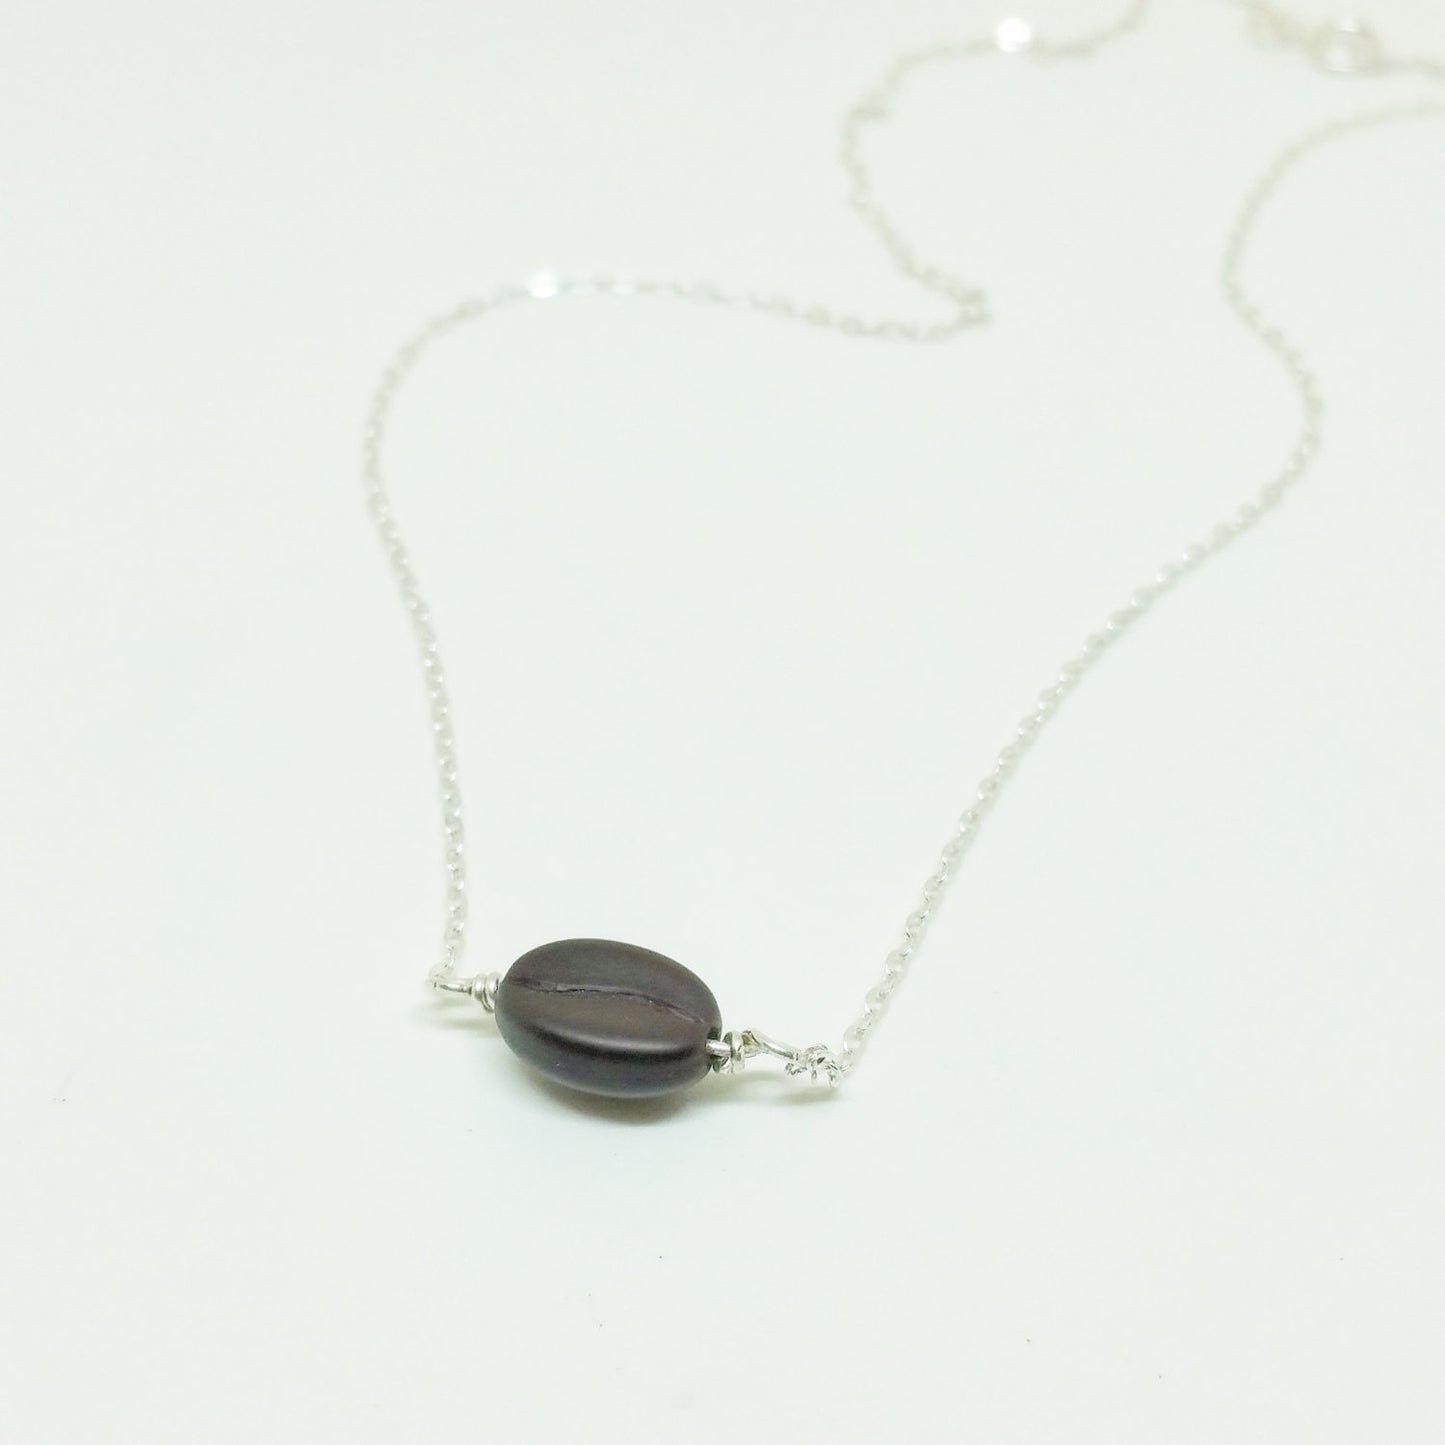 Coffee Bean Necklace - Sterling Silver Chain